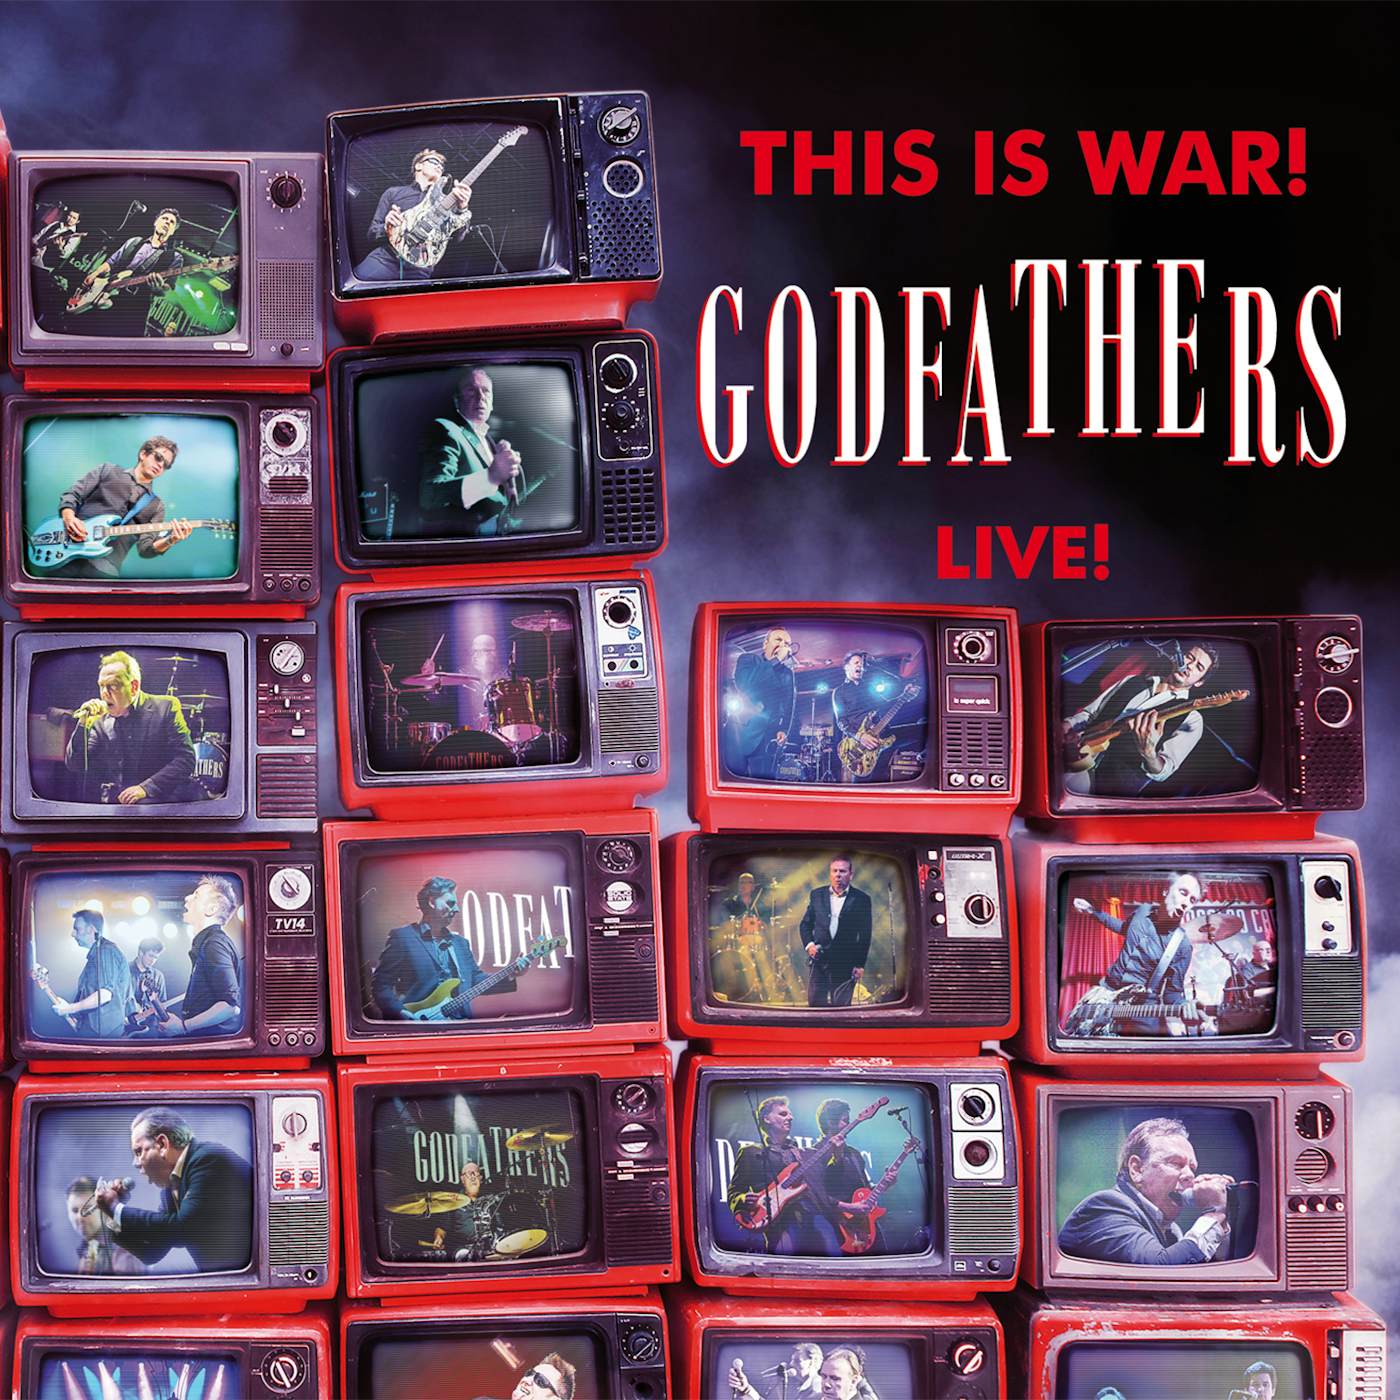 THIS IS WAR - THE GODFATHERS LIVE CD